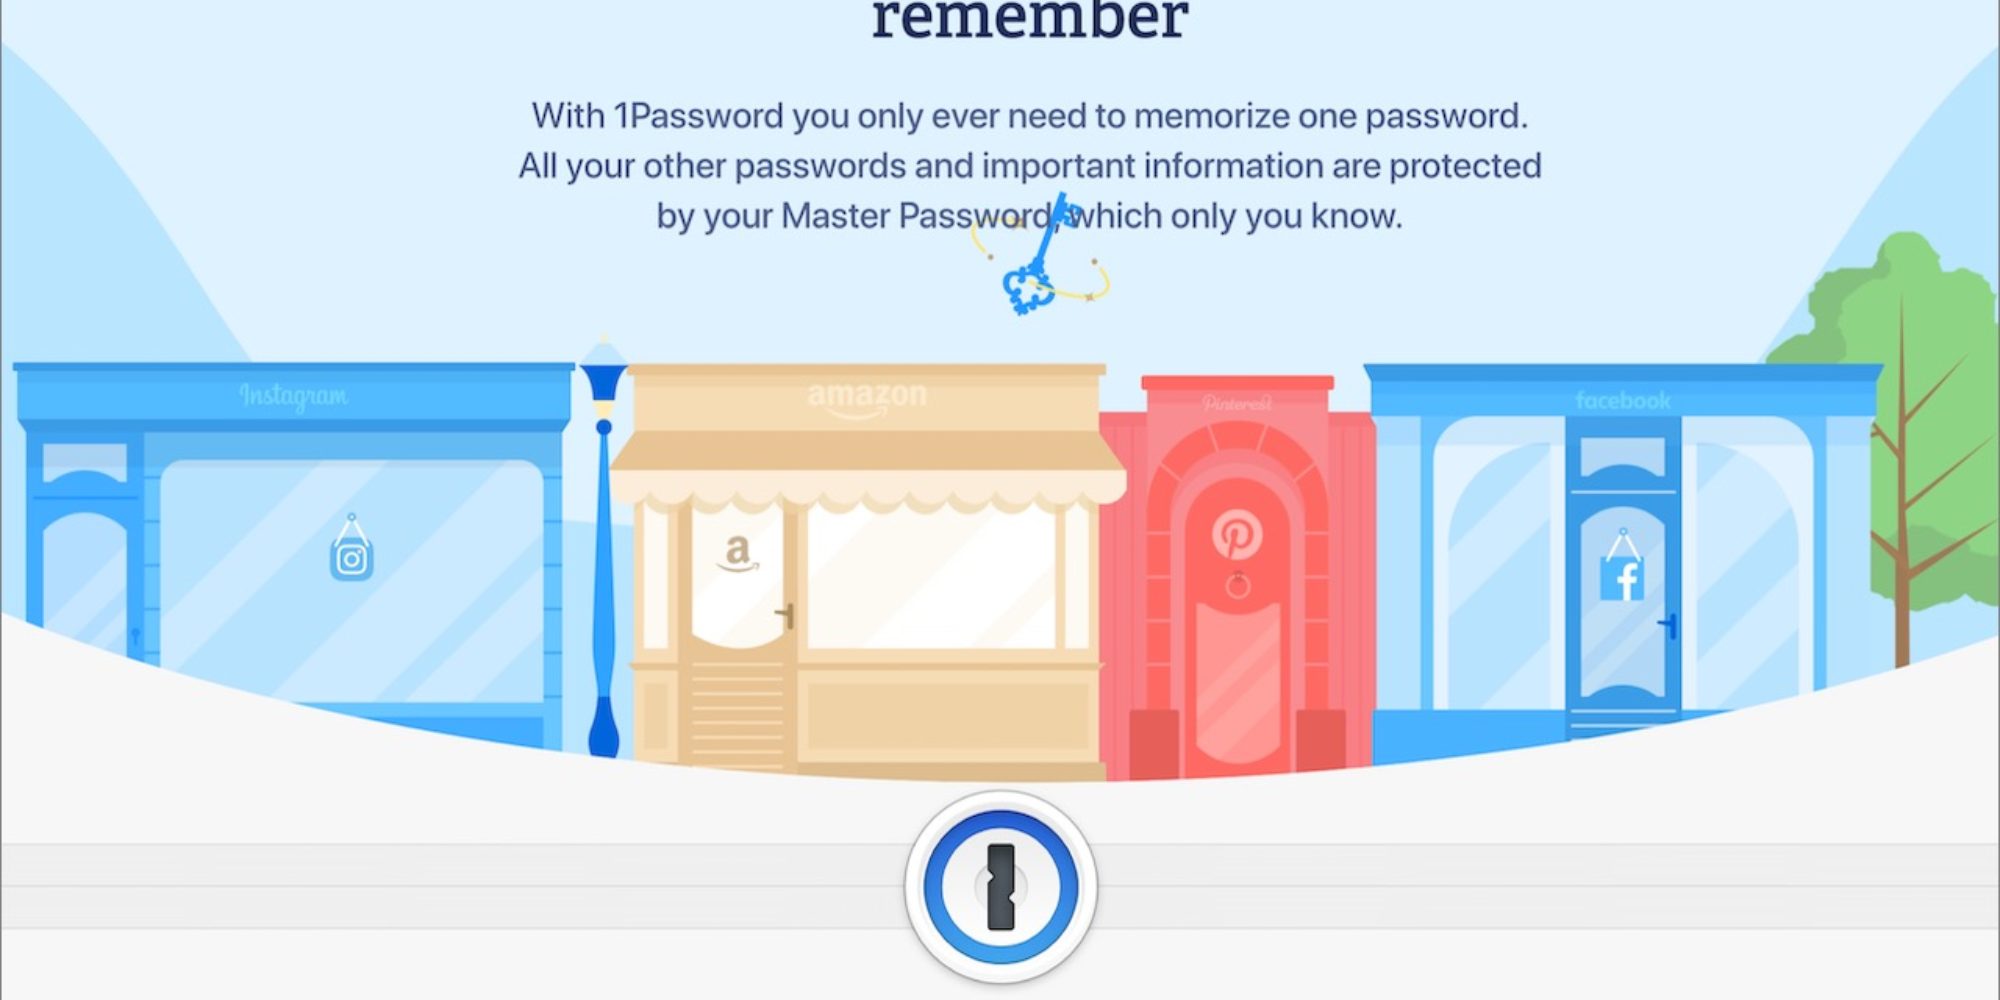 Getting Started with 1Password